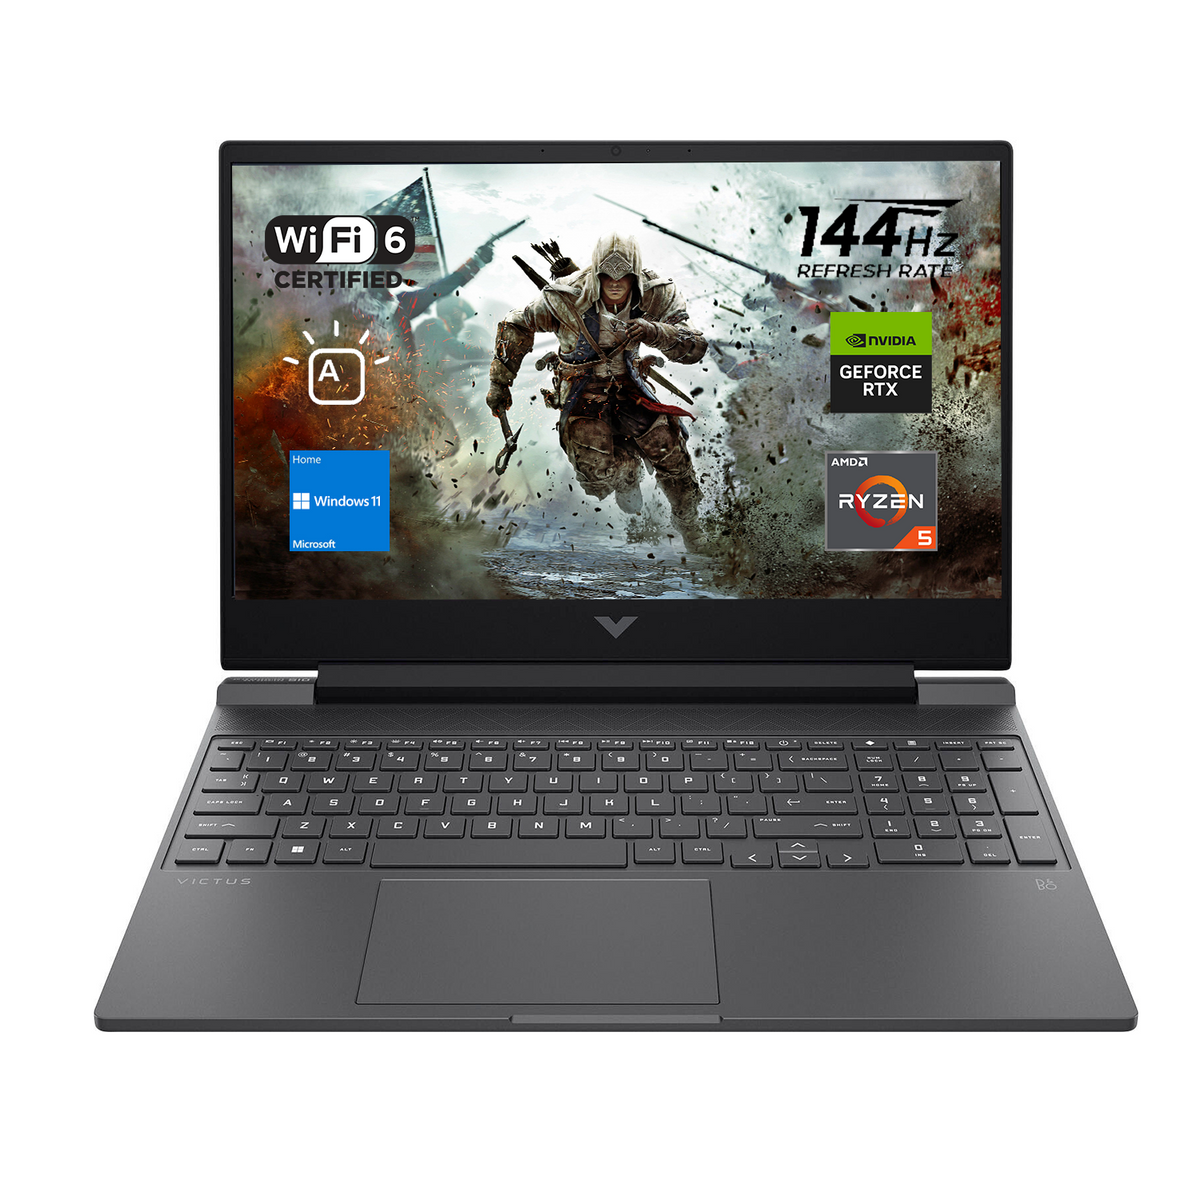 HP Victus Gaming Laptop, 15.6" FHD Non-touch 144Hz, AMD Ryzen 5 7535HS, NVIDIA GeForce RTX 2050, 8GB DDR5 RAM, 512GB PCIe M.2 SSD, Wi-Fi 6, Windows 11 Home, Silver